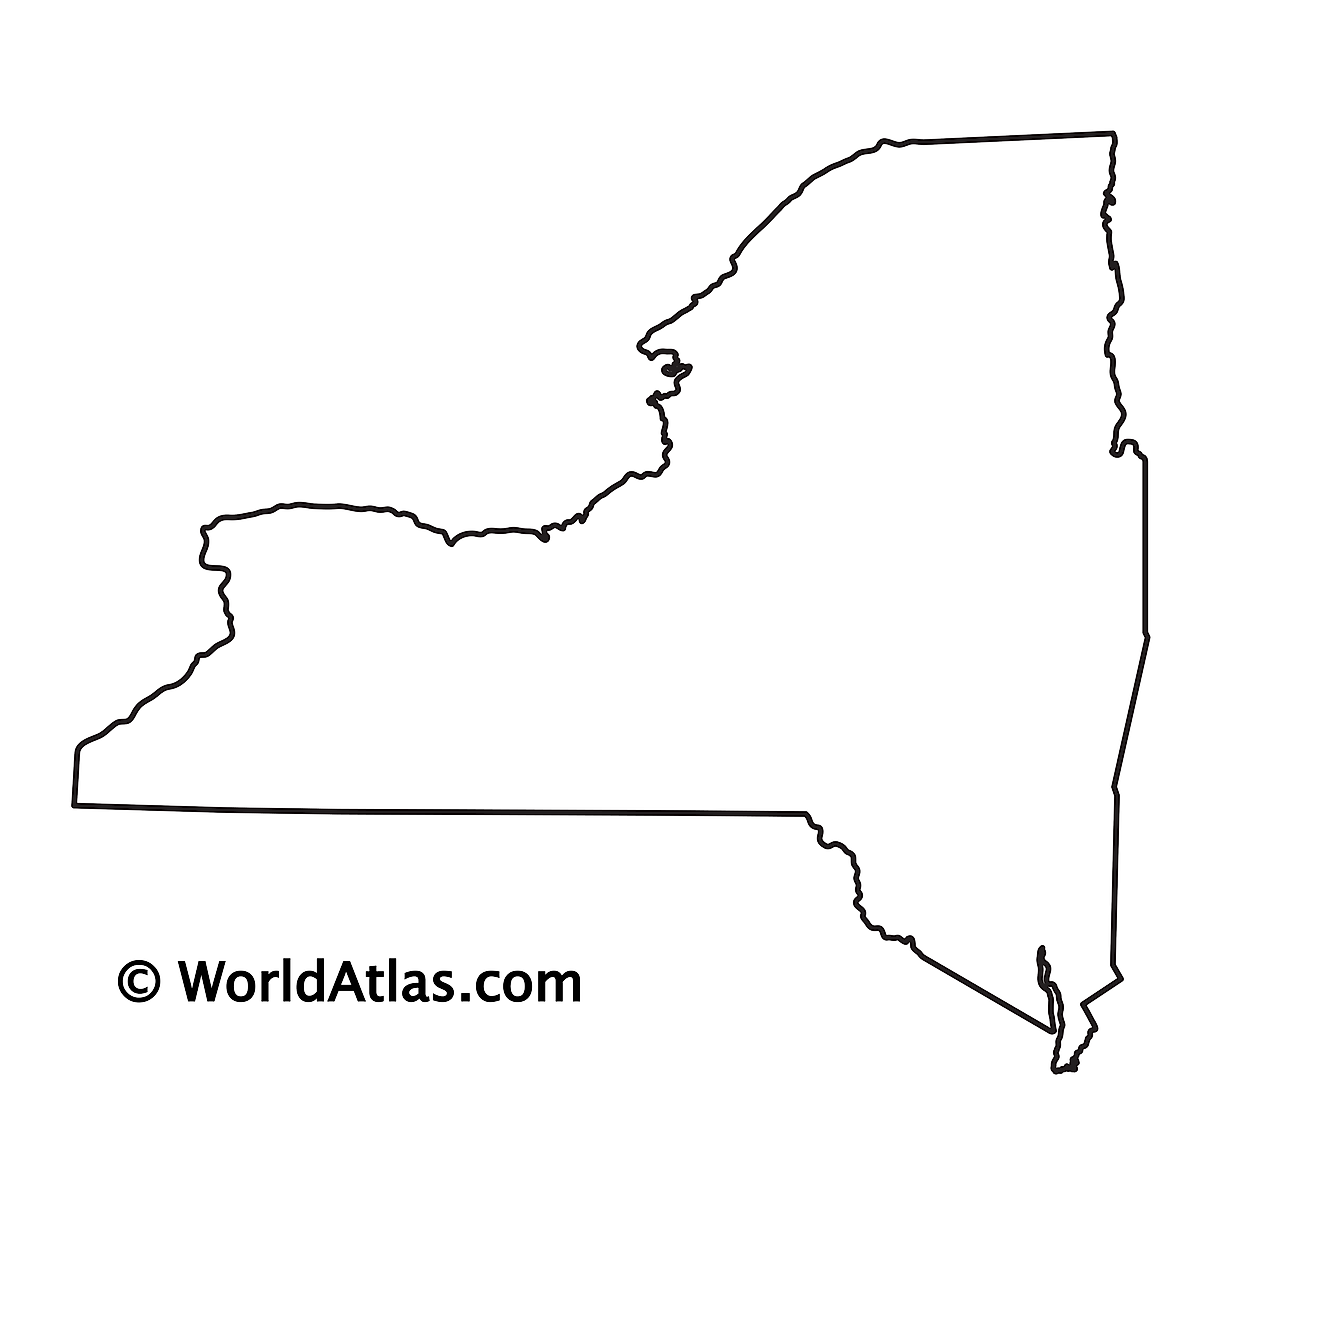 Blank Outline Map of New York